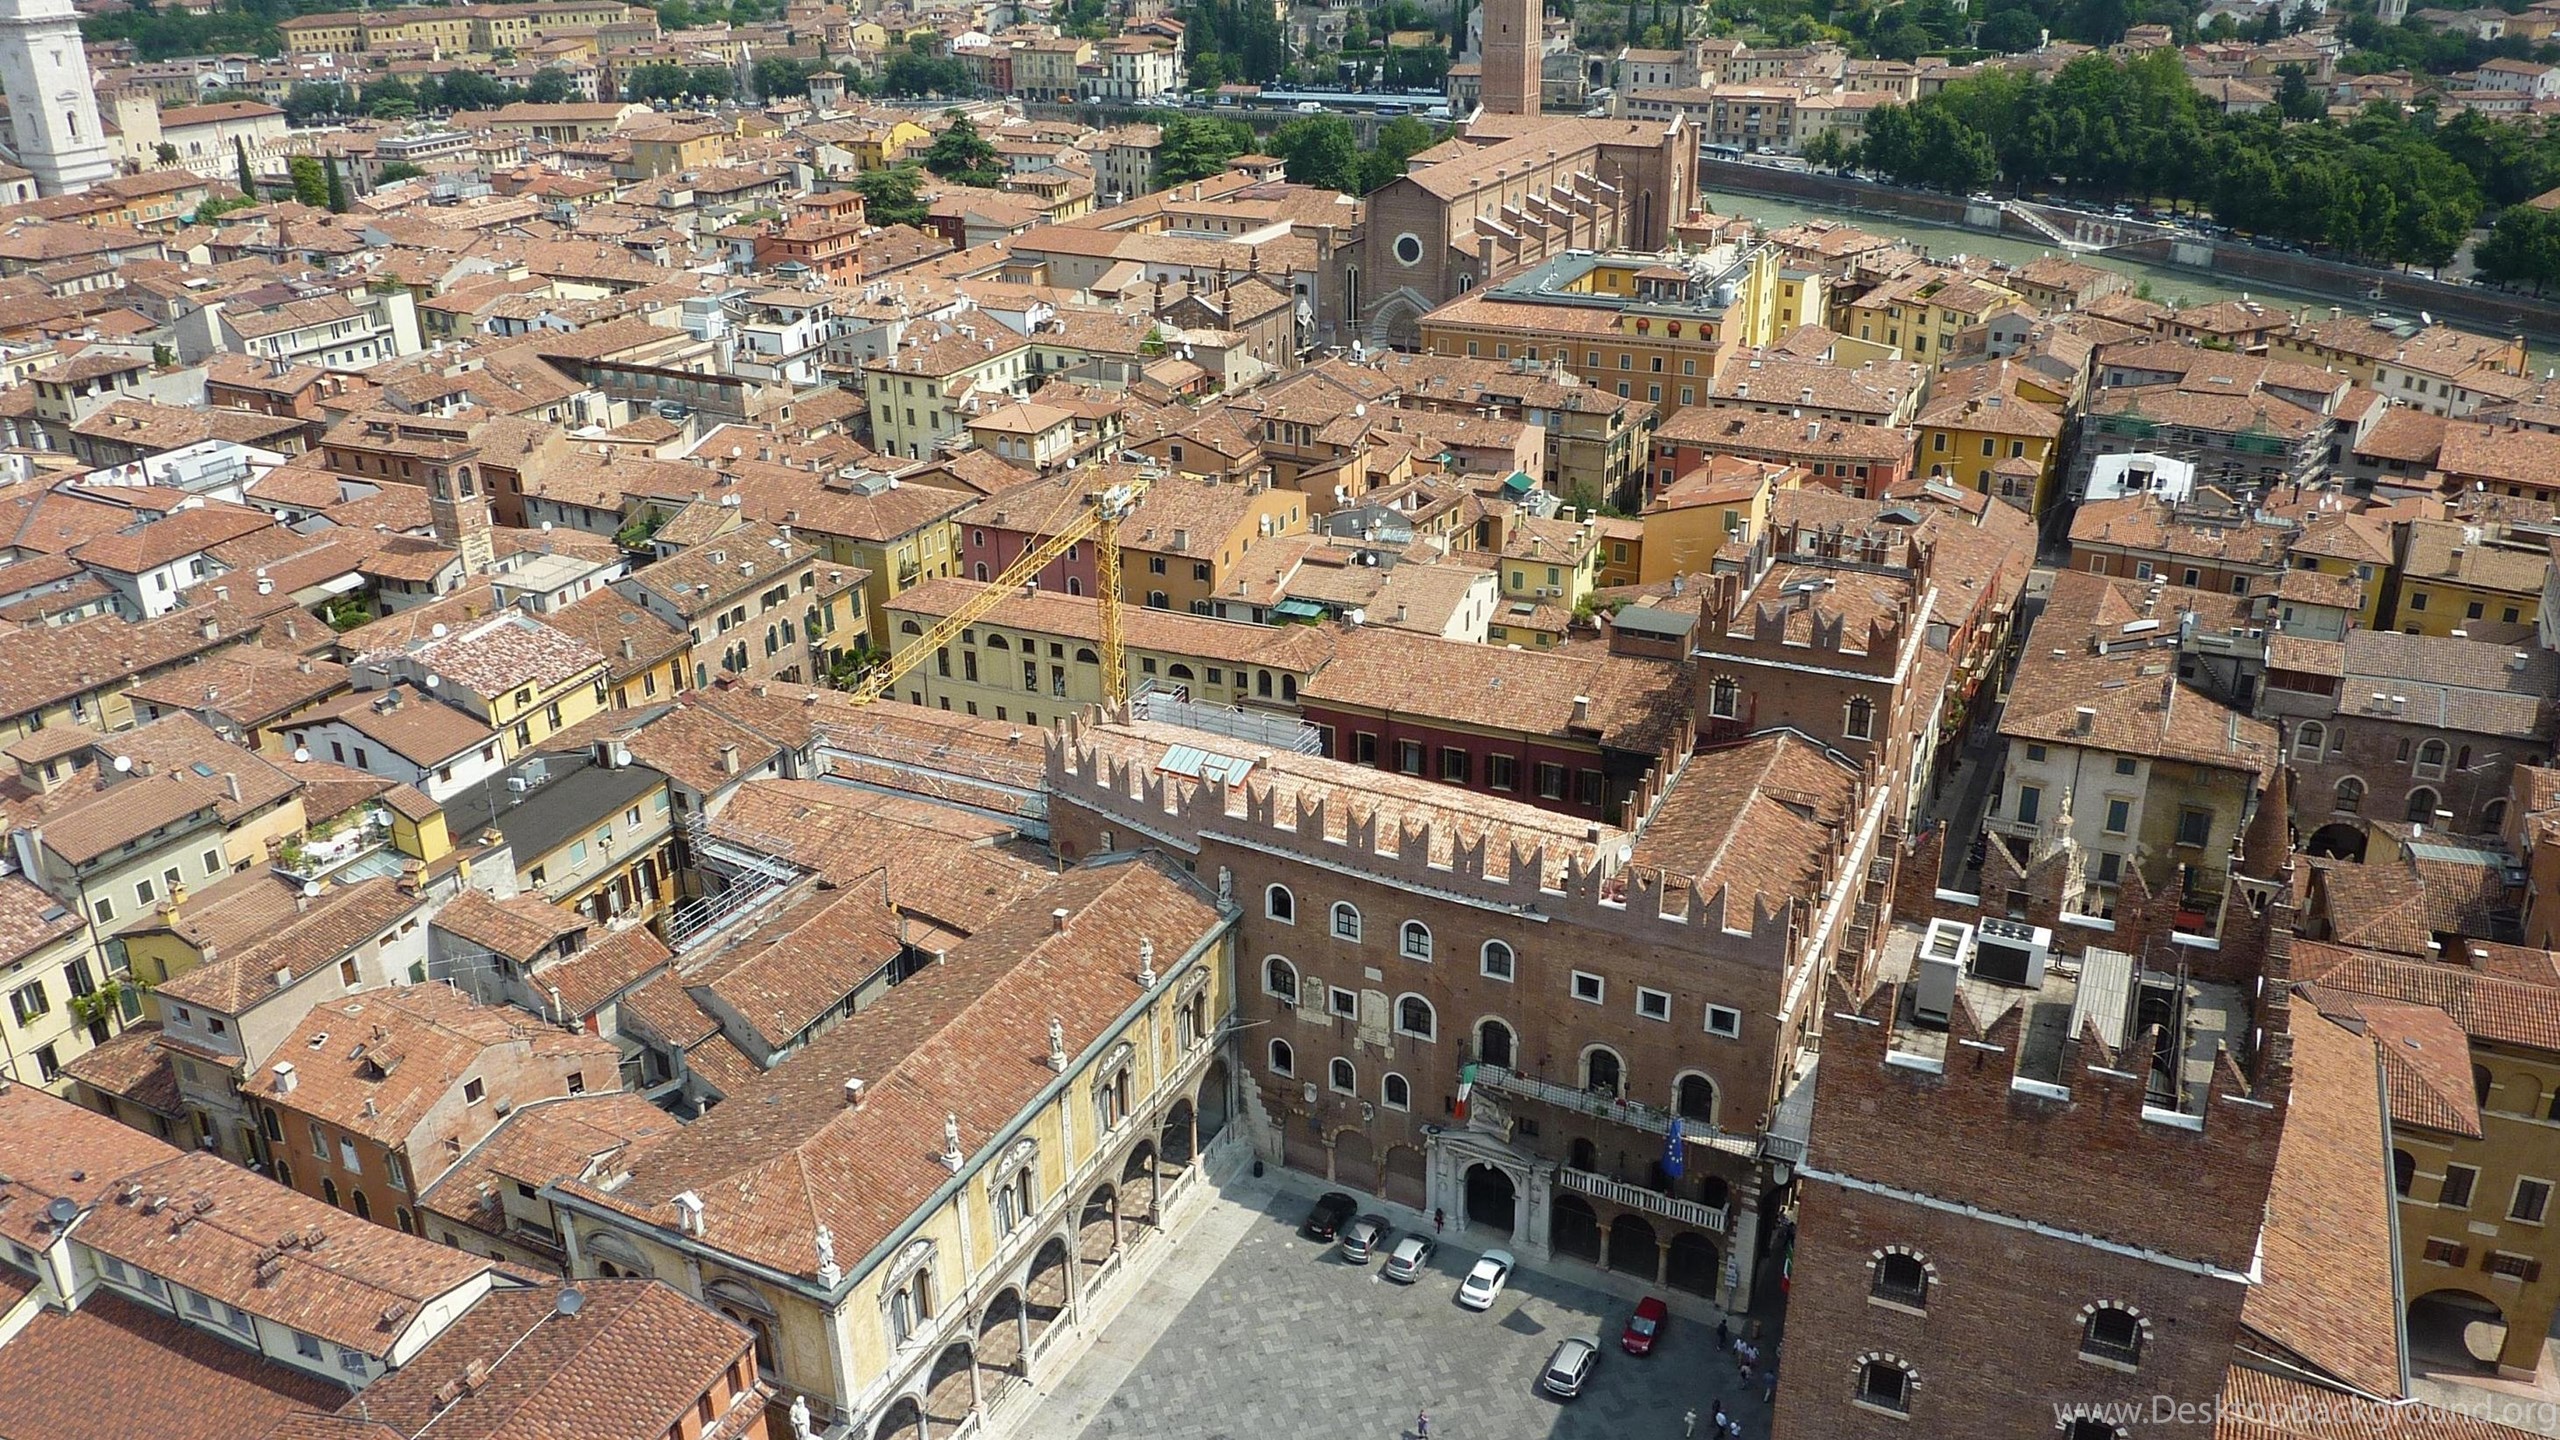 Panorama Of The City Of Verona, Italy Wallpaper And Image